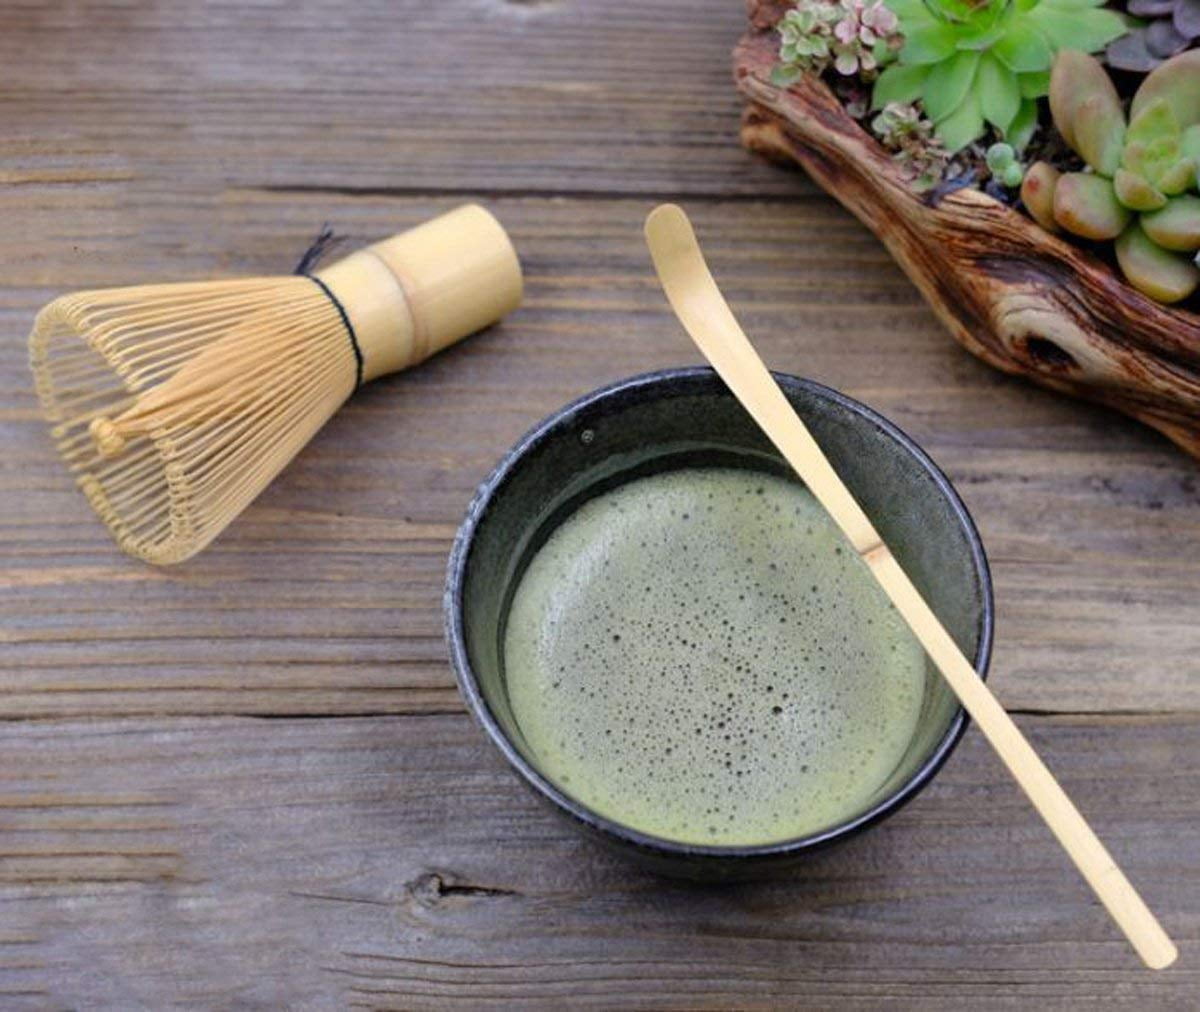 Matcha Powder Whisk Tool Bamboo Chasen Japanese Tea Ceremony Accessory for Birthdays Anniversaries Holidays or Any Other Occasion 